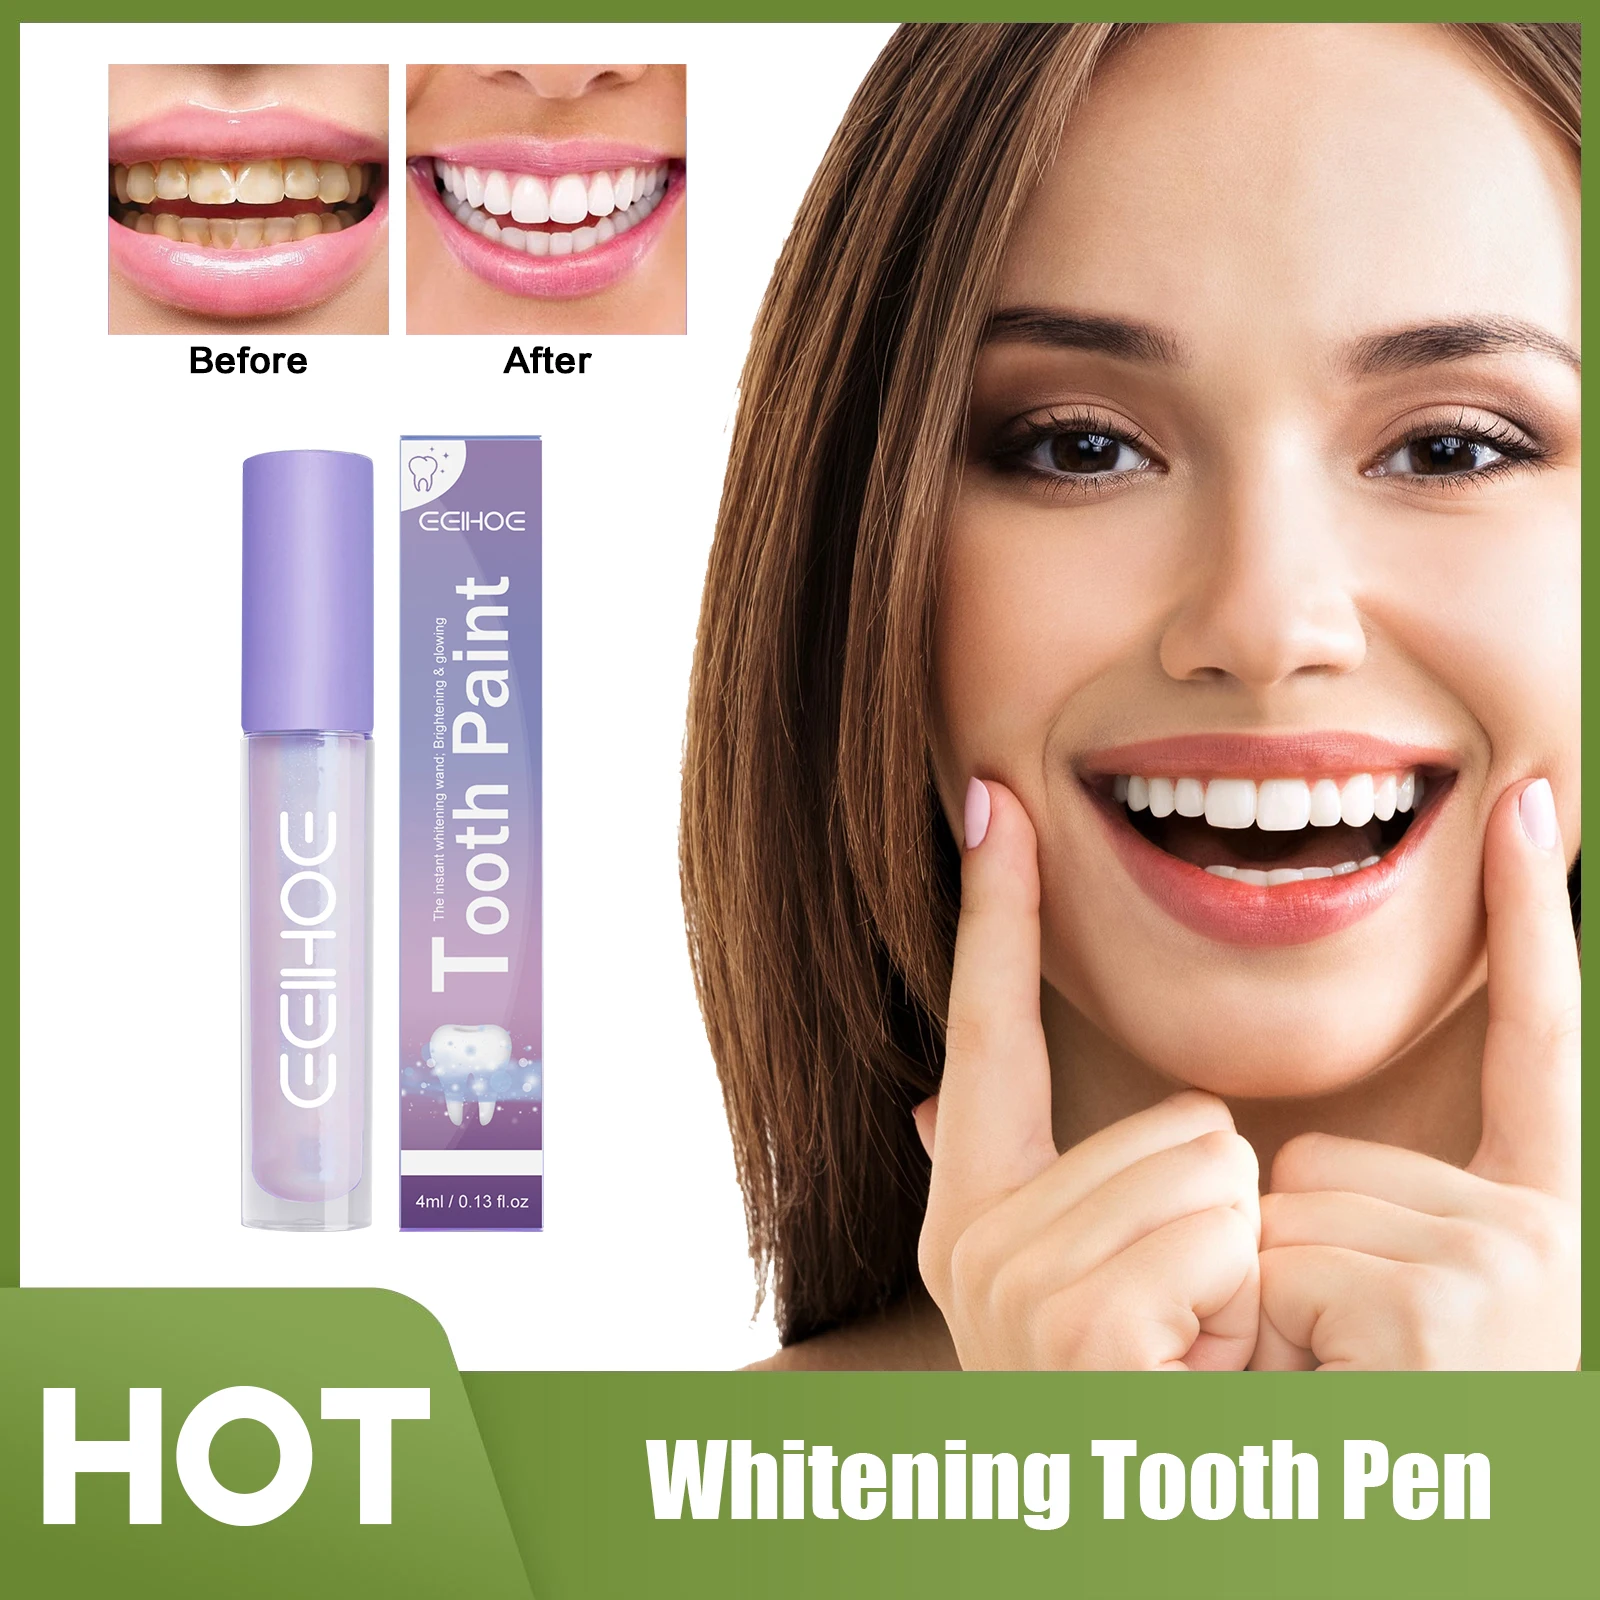 

Whitening Tooth Pen Deeply Cleansing Oral Effective Remove Dental Plaque Stains Yellow Teeth Bleaching Fresh Breath Brightening